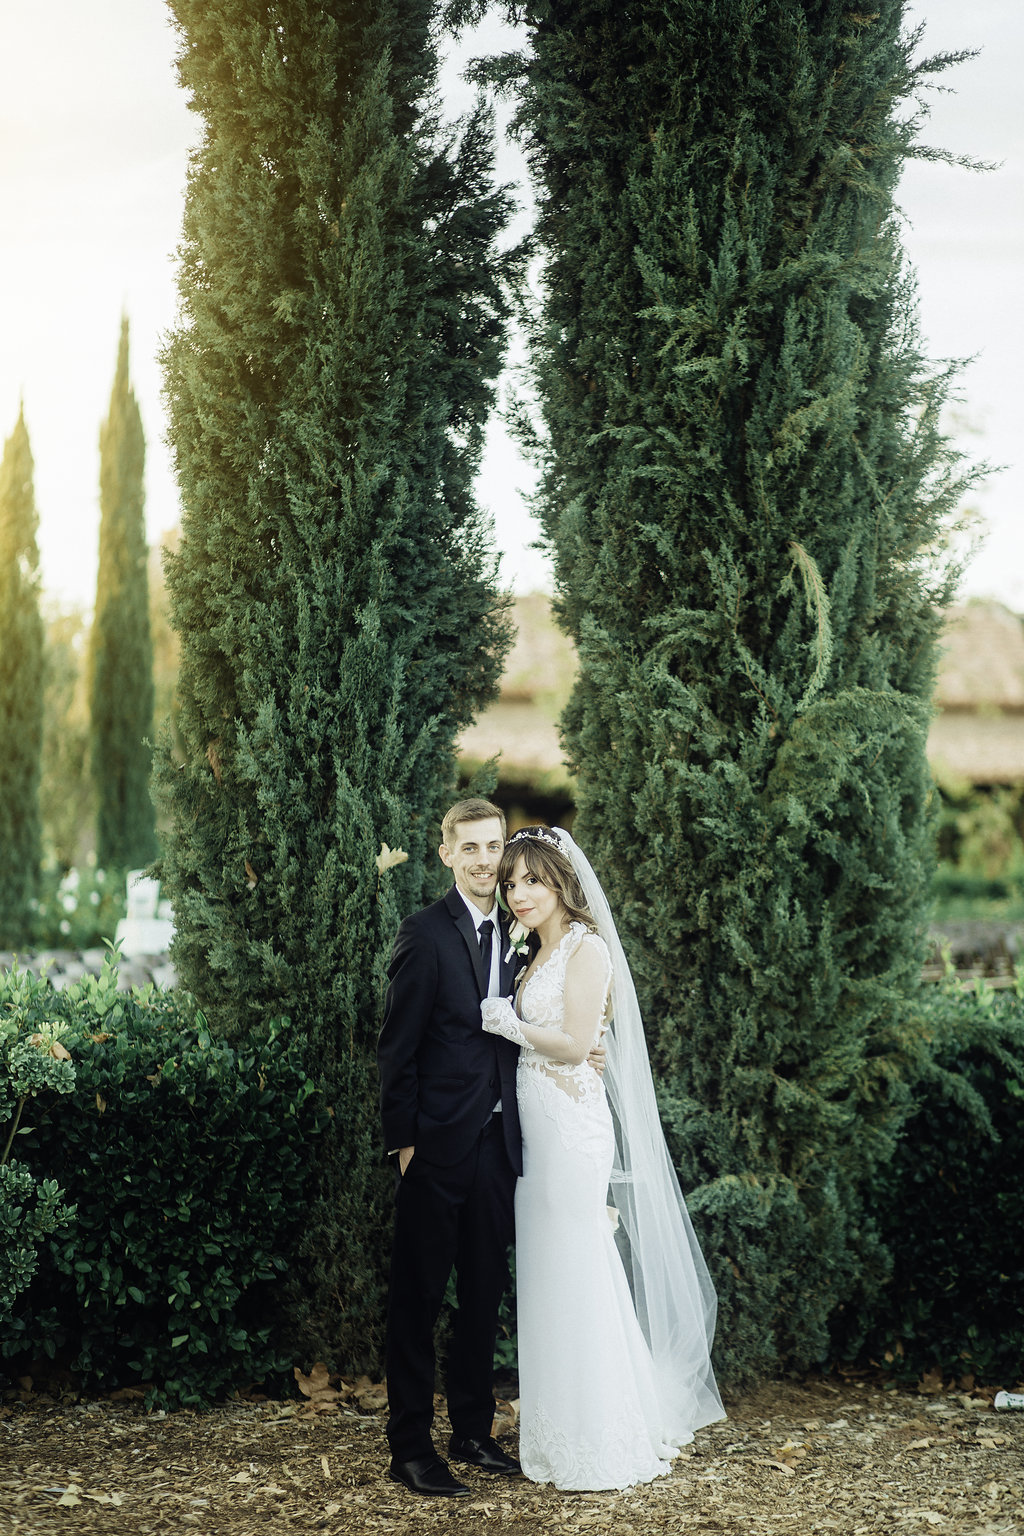 Wedding Photograph Of Bride ANd Groom Holding Each Other In The Garden Los Angeles